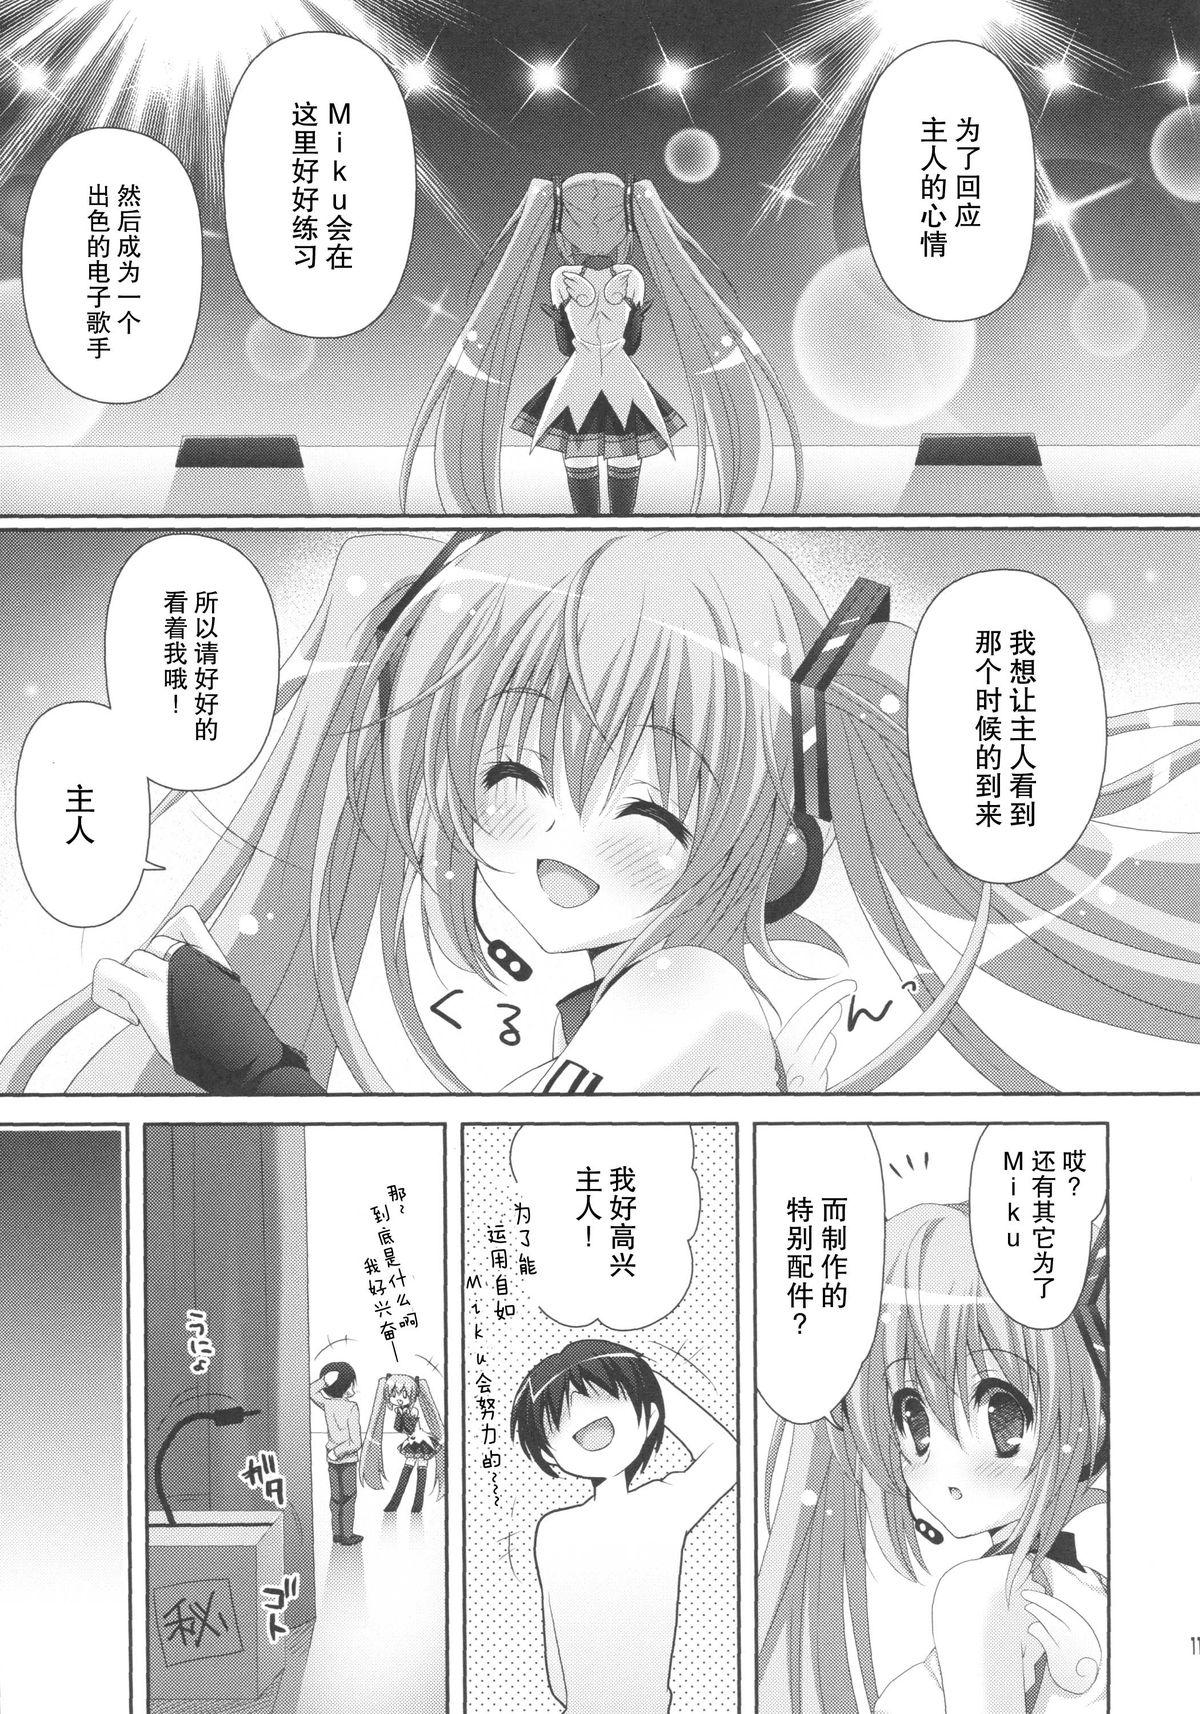 Bokep ANGEL ALIVE - Vocaloid Monster Dick - Page 10